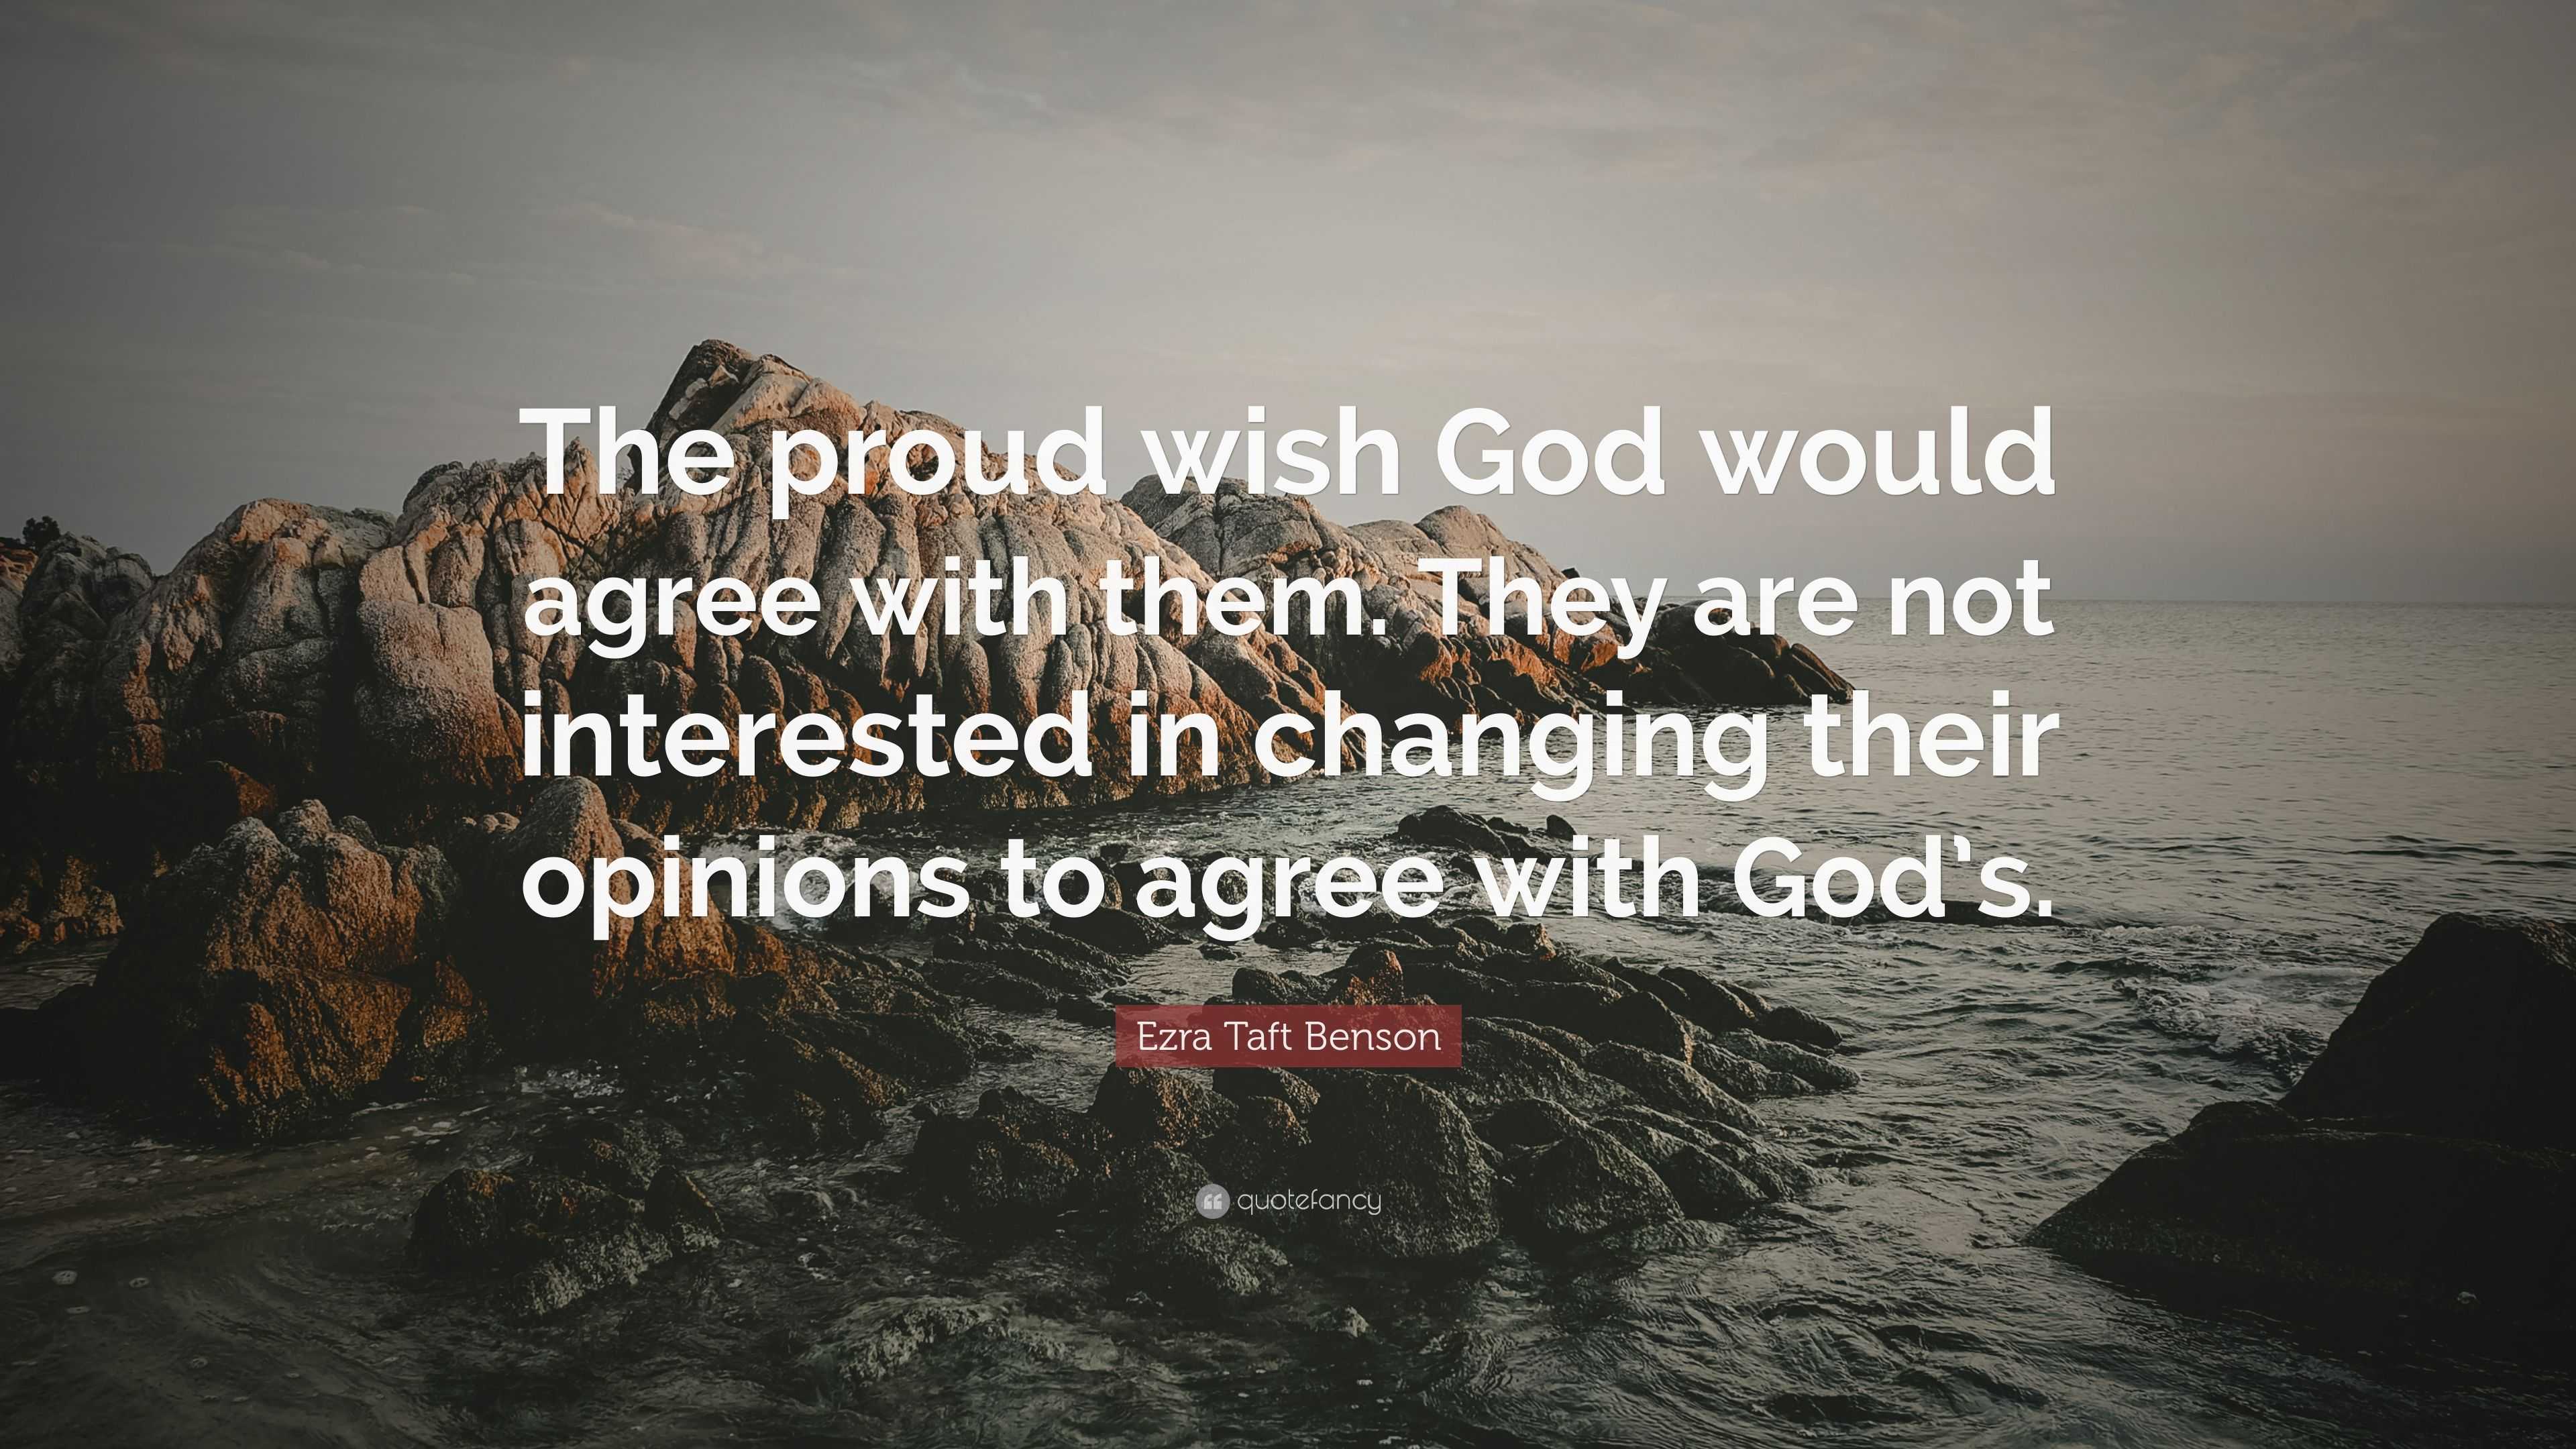 Ezra Taft Benson Quote: “The proud wish God would agree with them. They ...